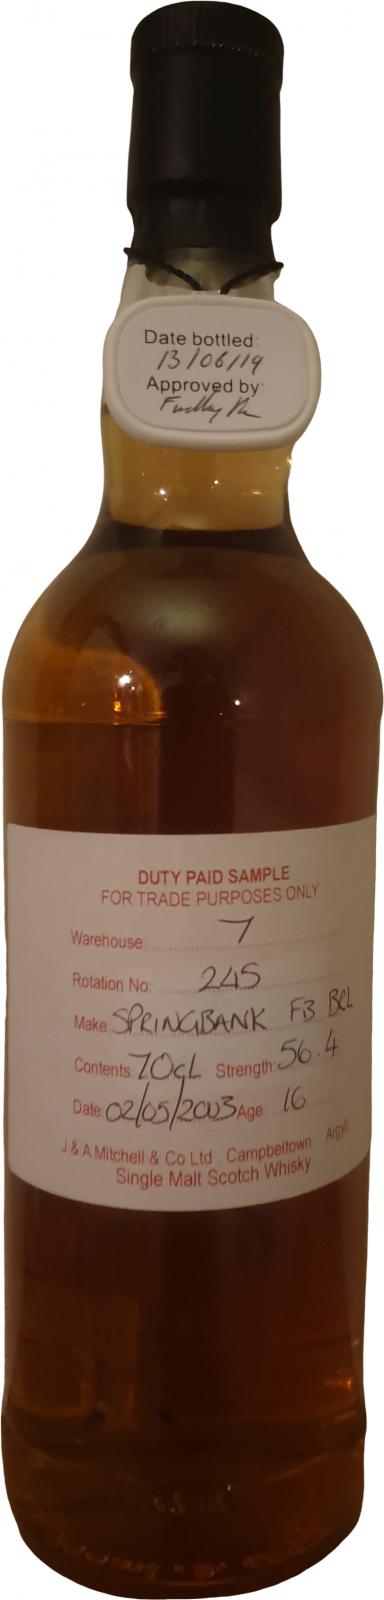 Springbank 2003 Duty Paid Sample For Trade Purposes Only Fresh Bourbon Barrel Rotation 245 56.4% 700ml